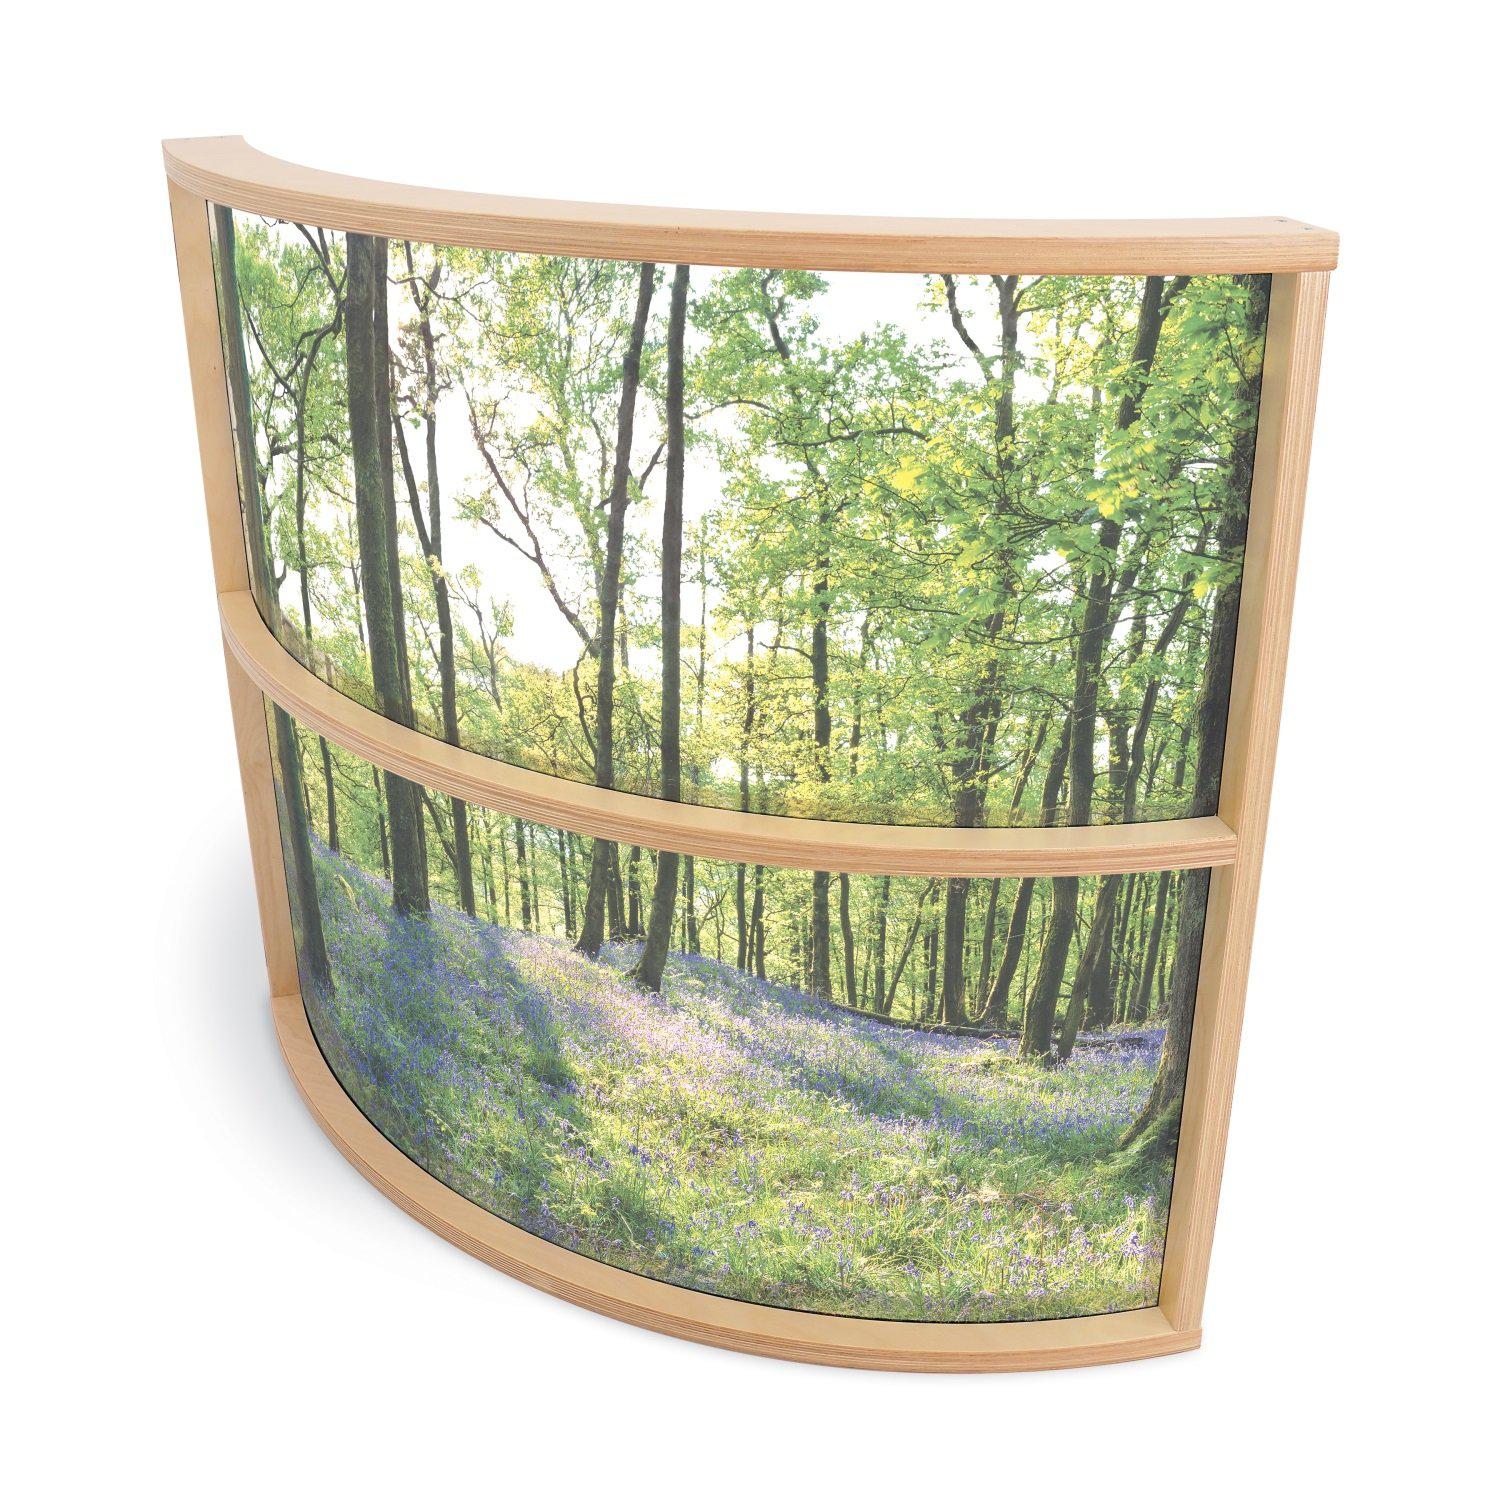 Nature View Curved Divider Panel, 36" H